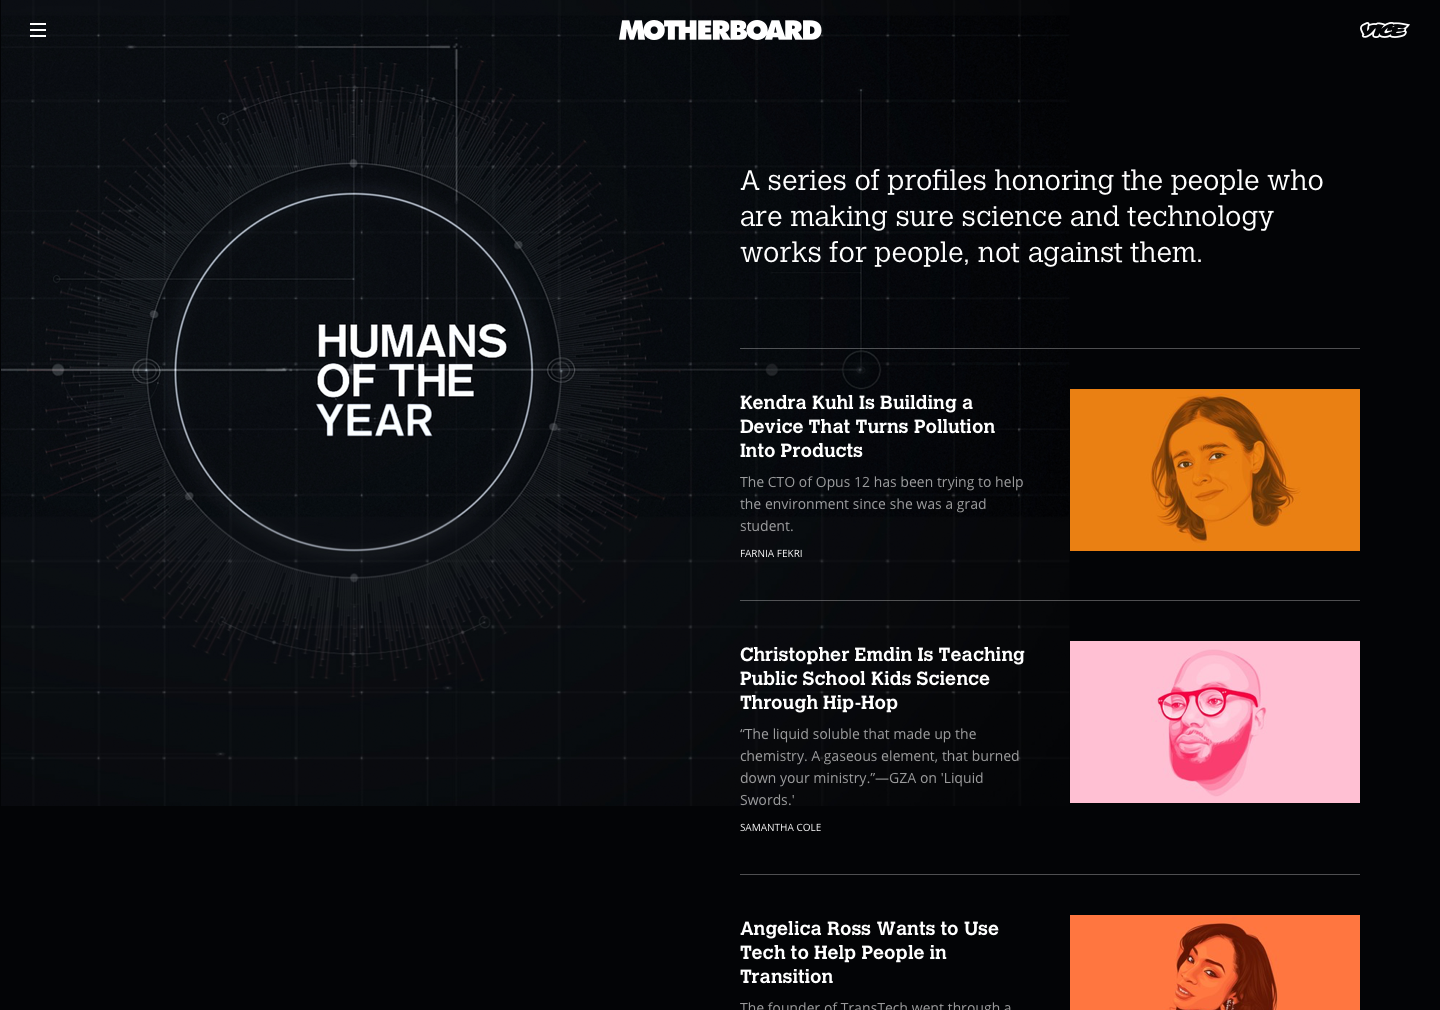 Humans of the Year, a series on Motherboard